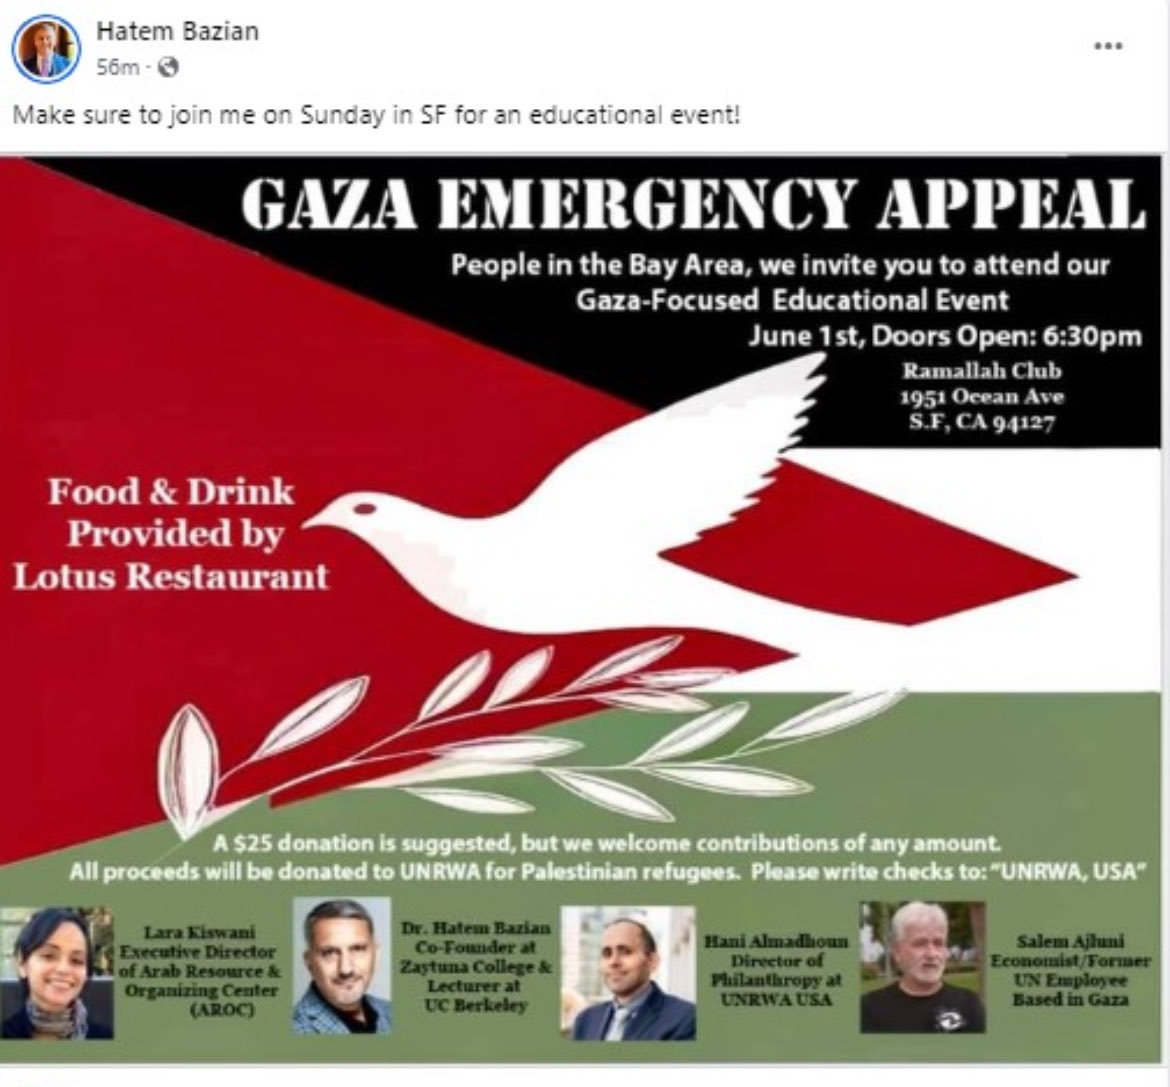 Founder/Chair of AMP & founder of SJP speaking at an UNRWA fundraiser.